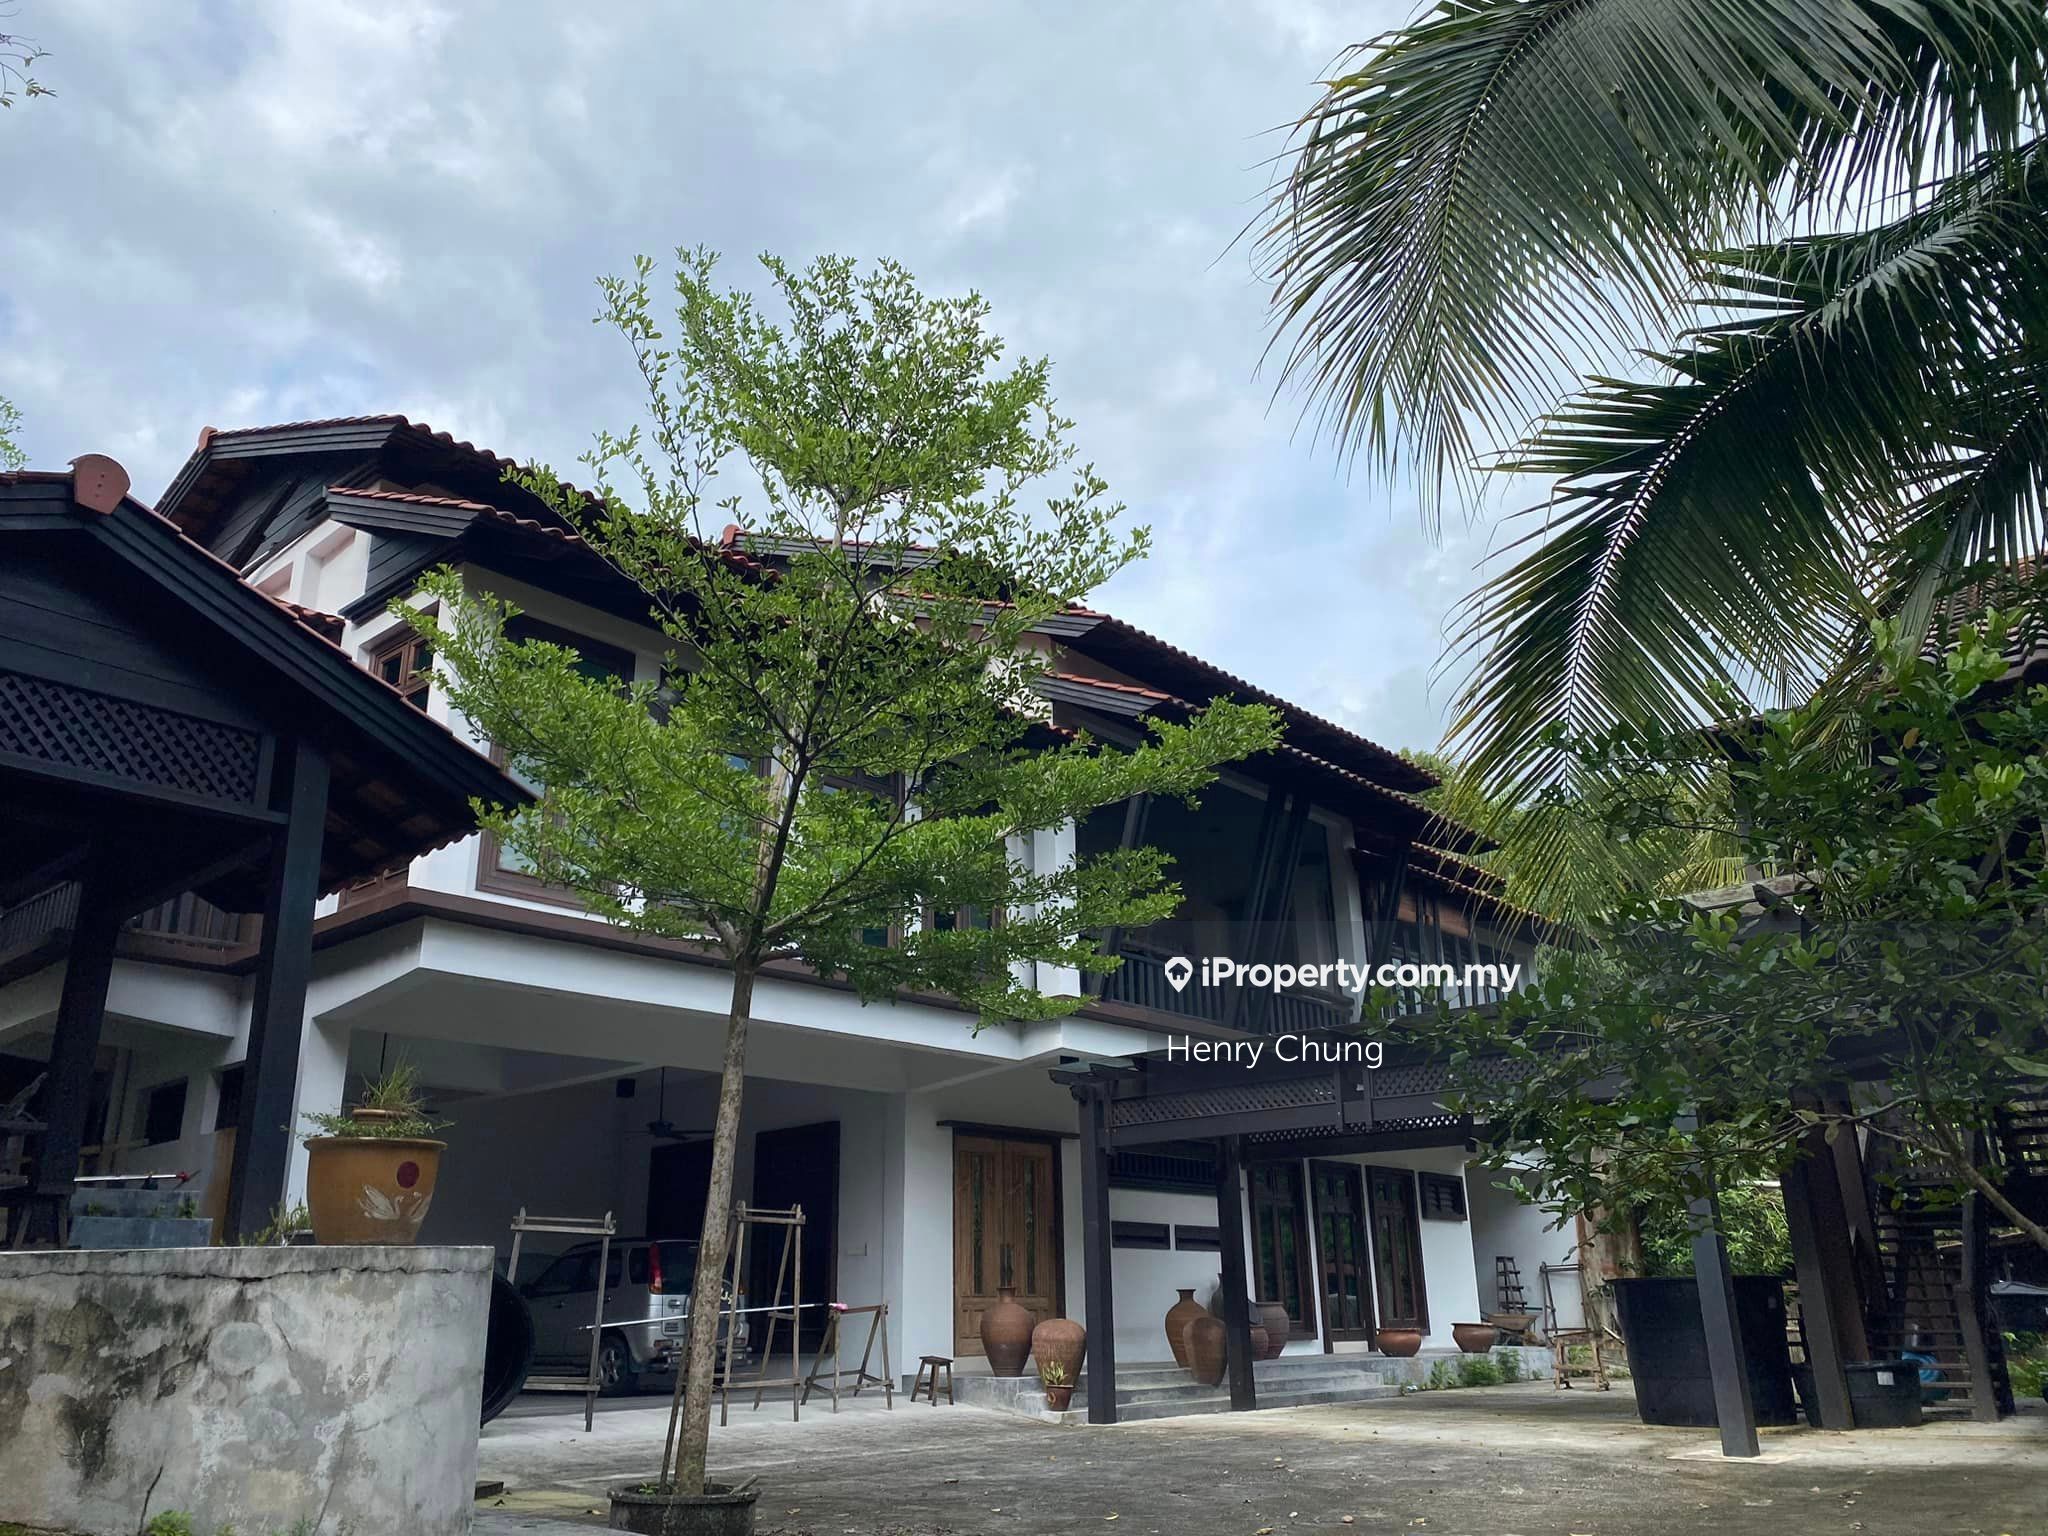 Bukit kinding FullyFurnished Resort 1 Acre forSale, Ipoh